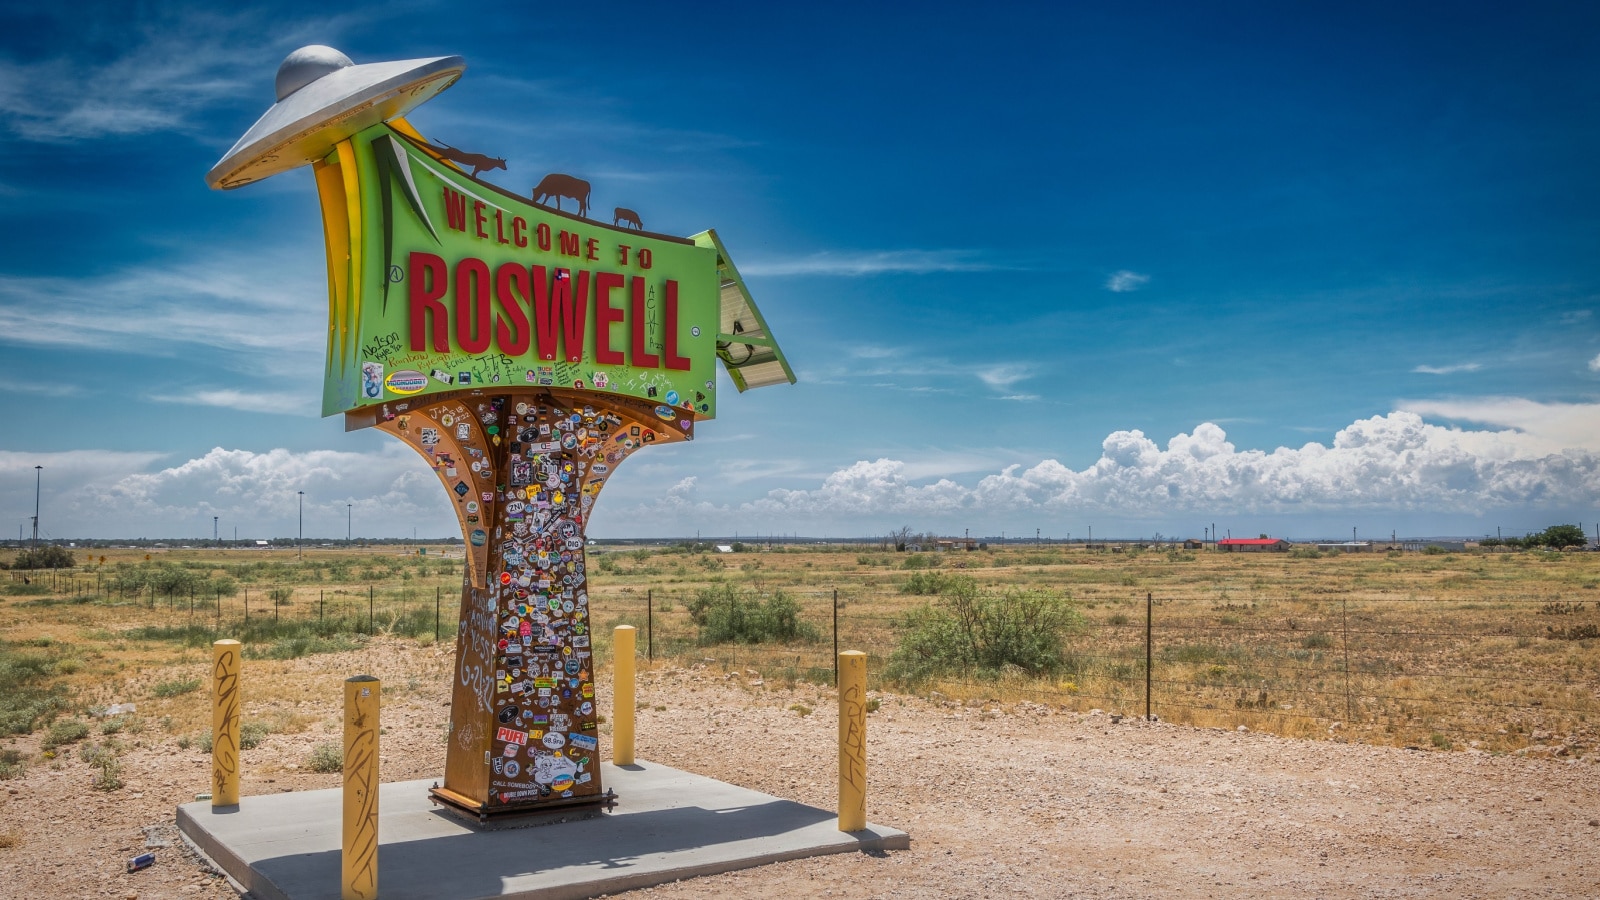 Roswell, New Mexico, USA - July 30, 2022: The colorful sign, north of the city on highway 285, welcoming travelers to the city.